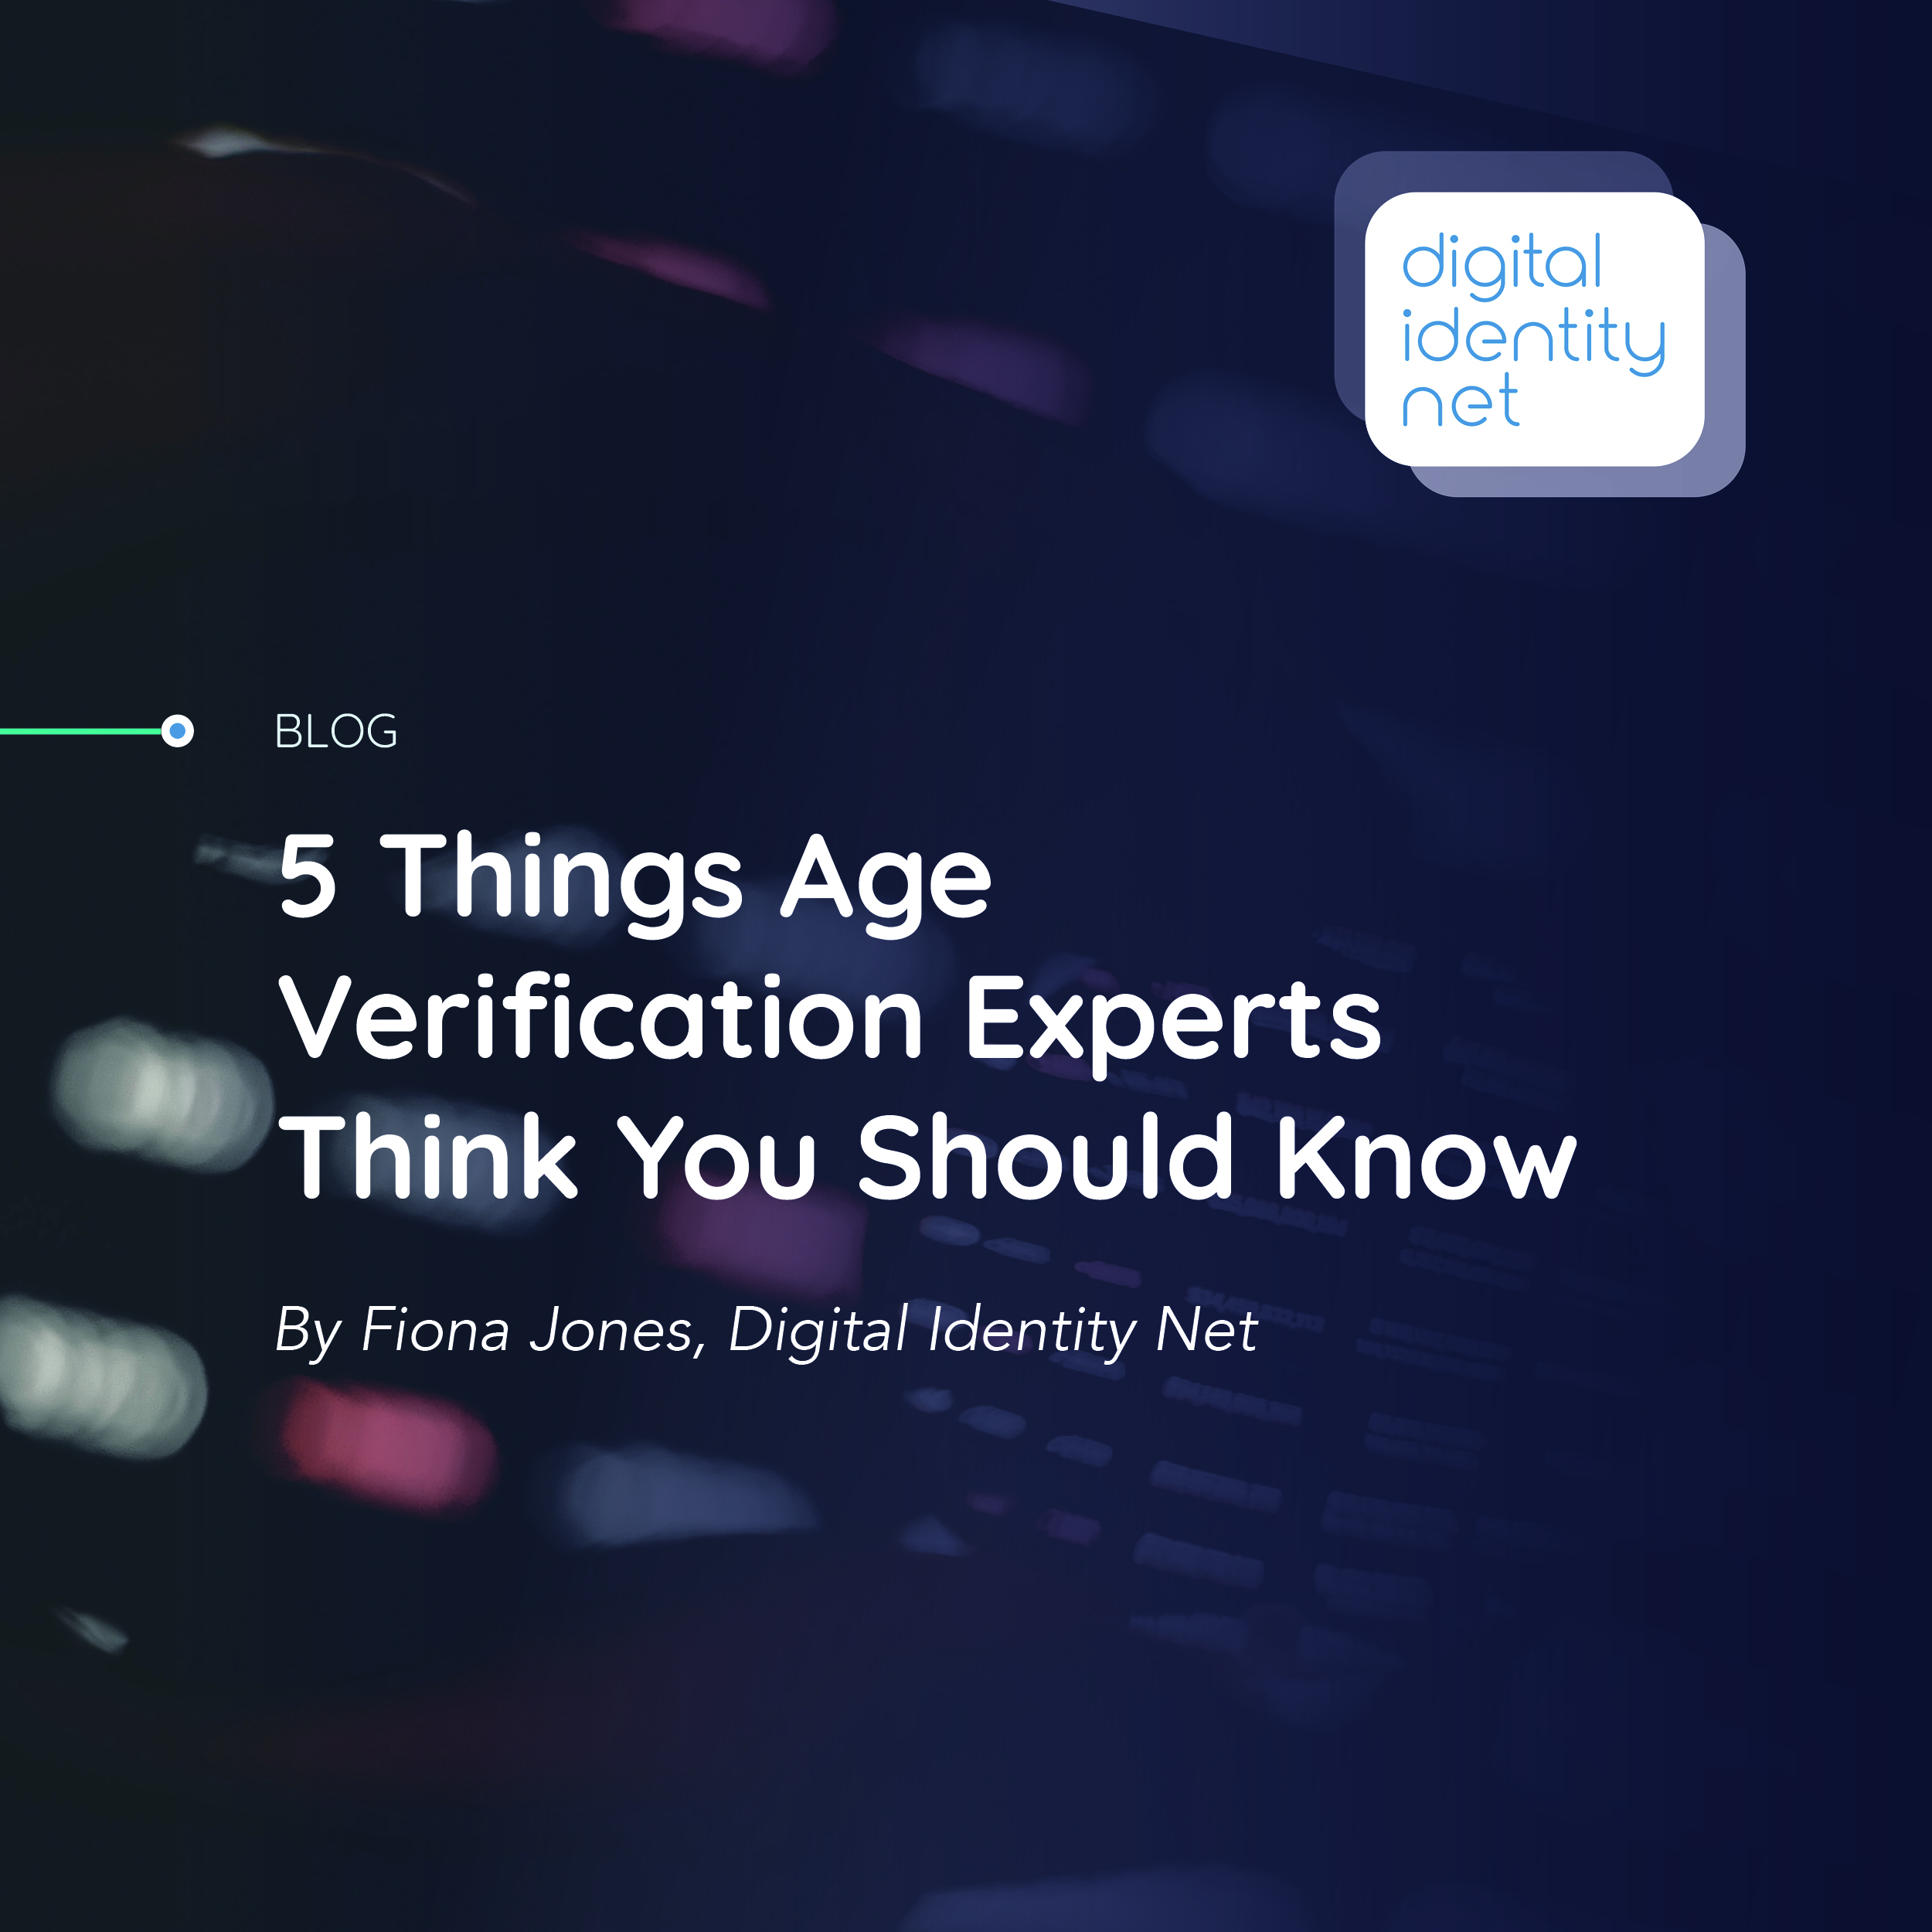 5 things age verification experts think you should know